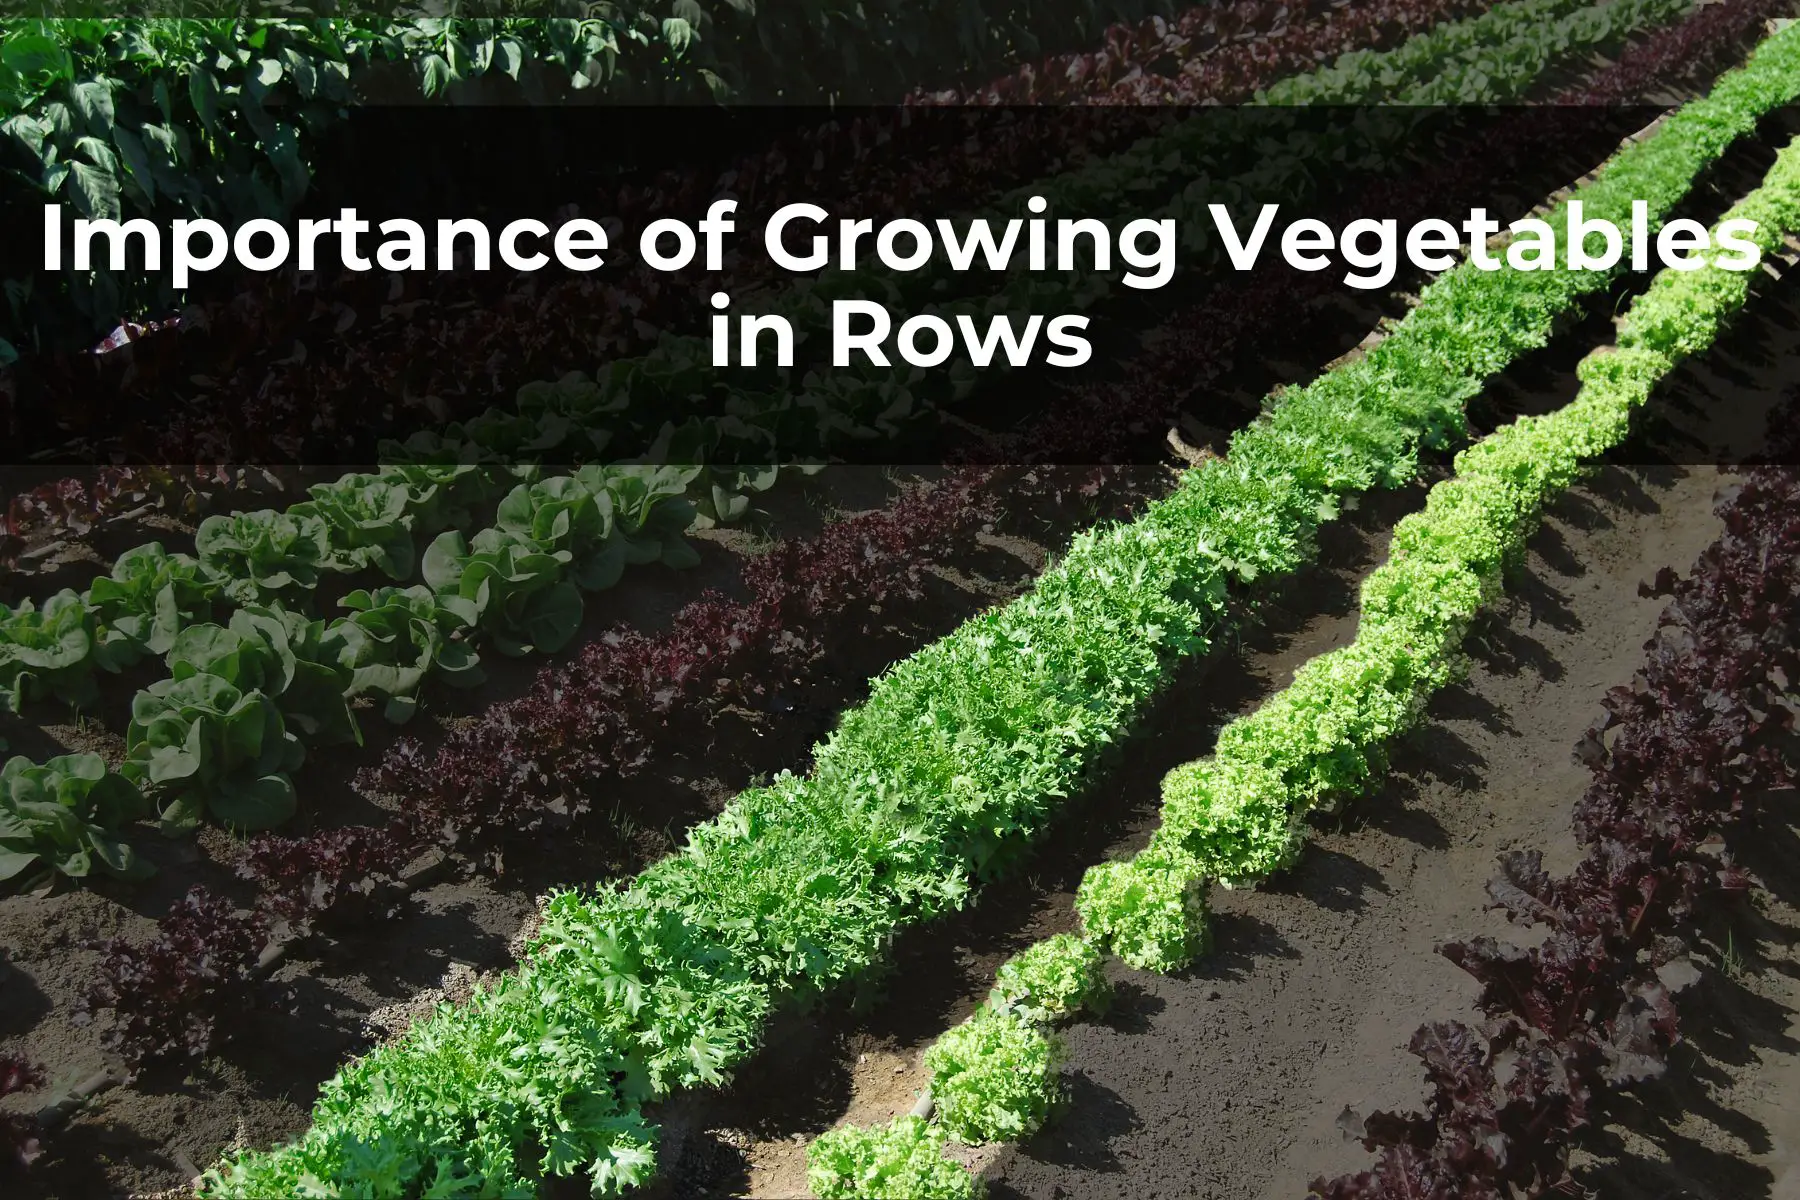 Importance of Growing Vegetables in Rows